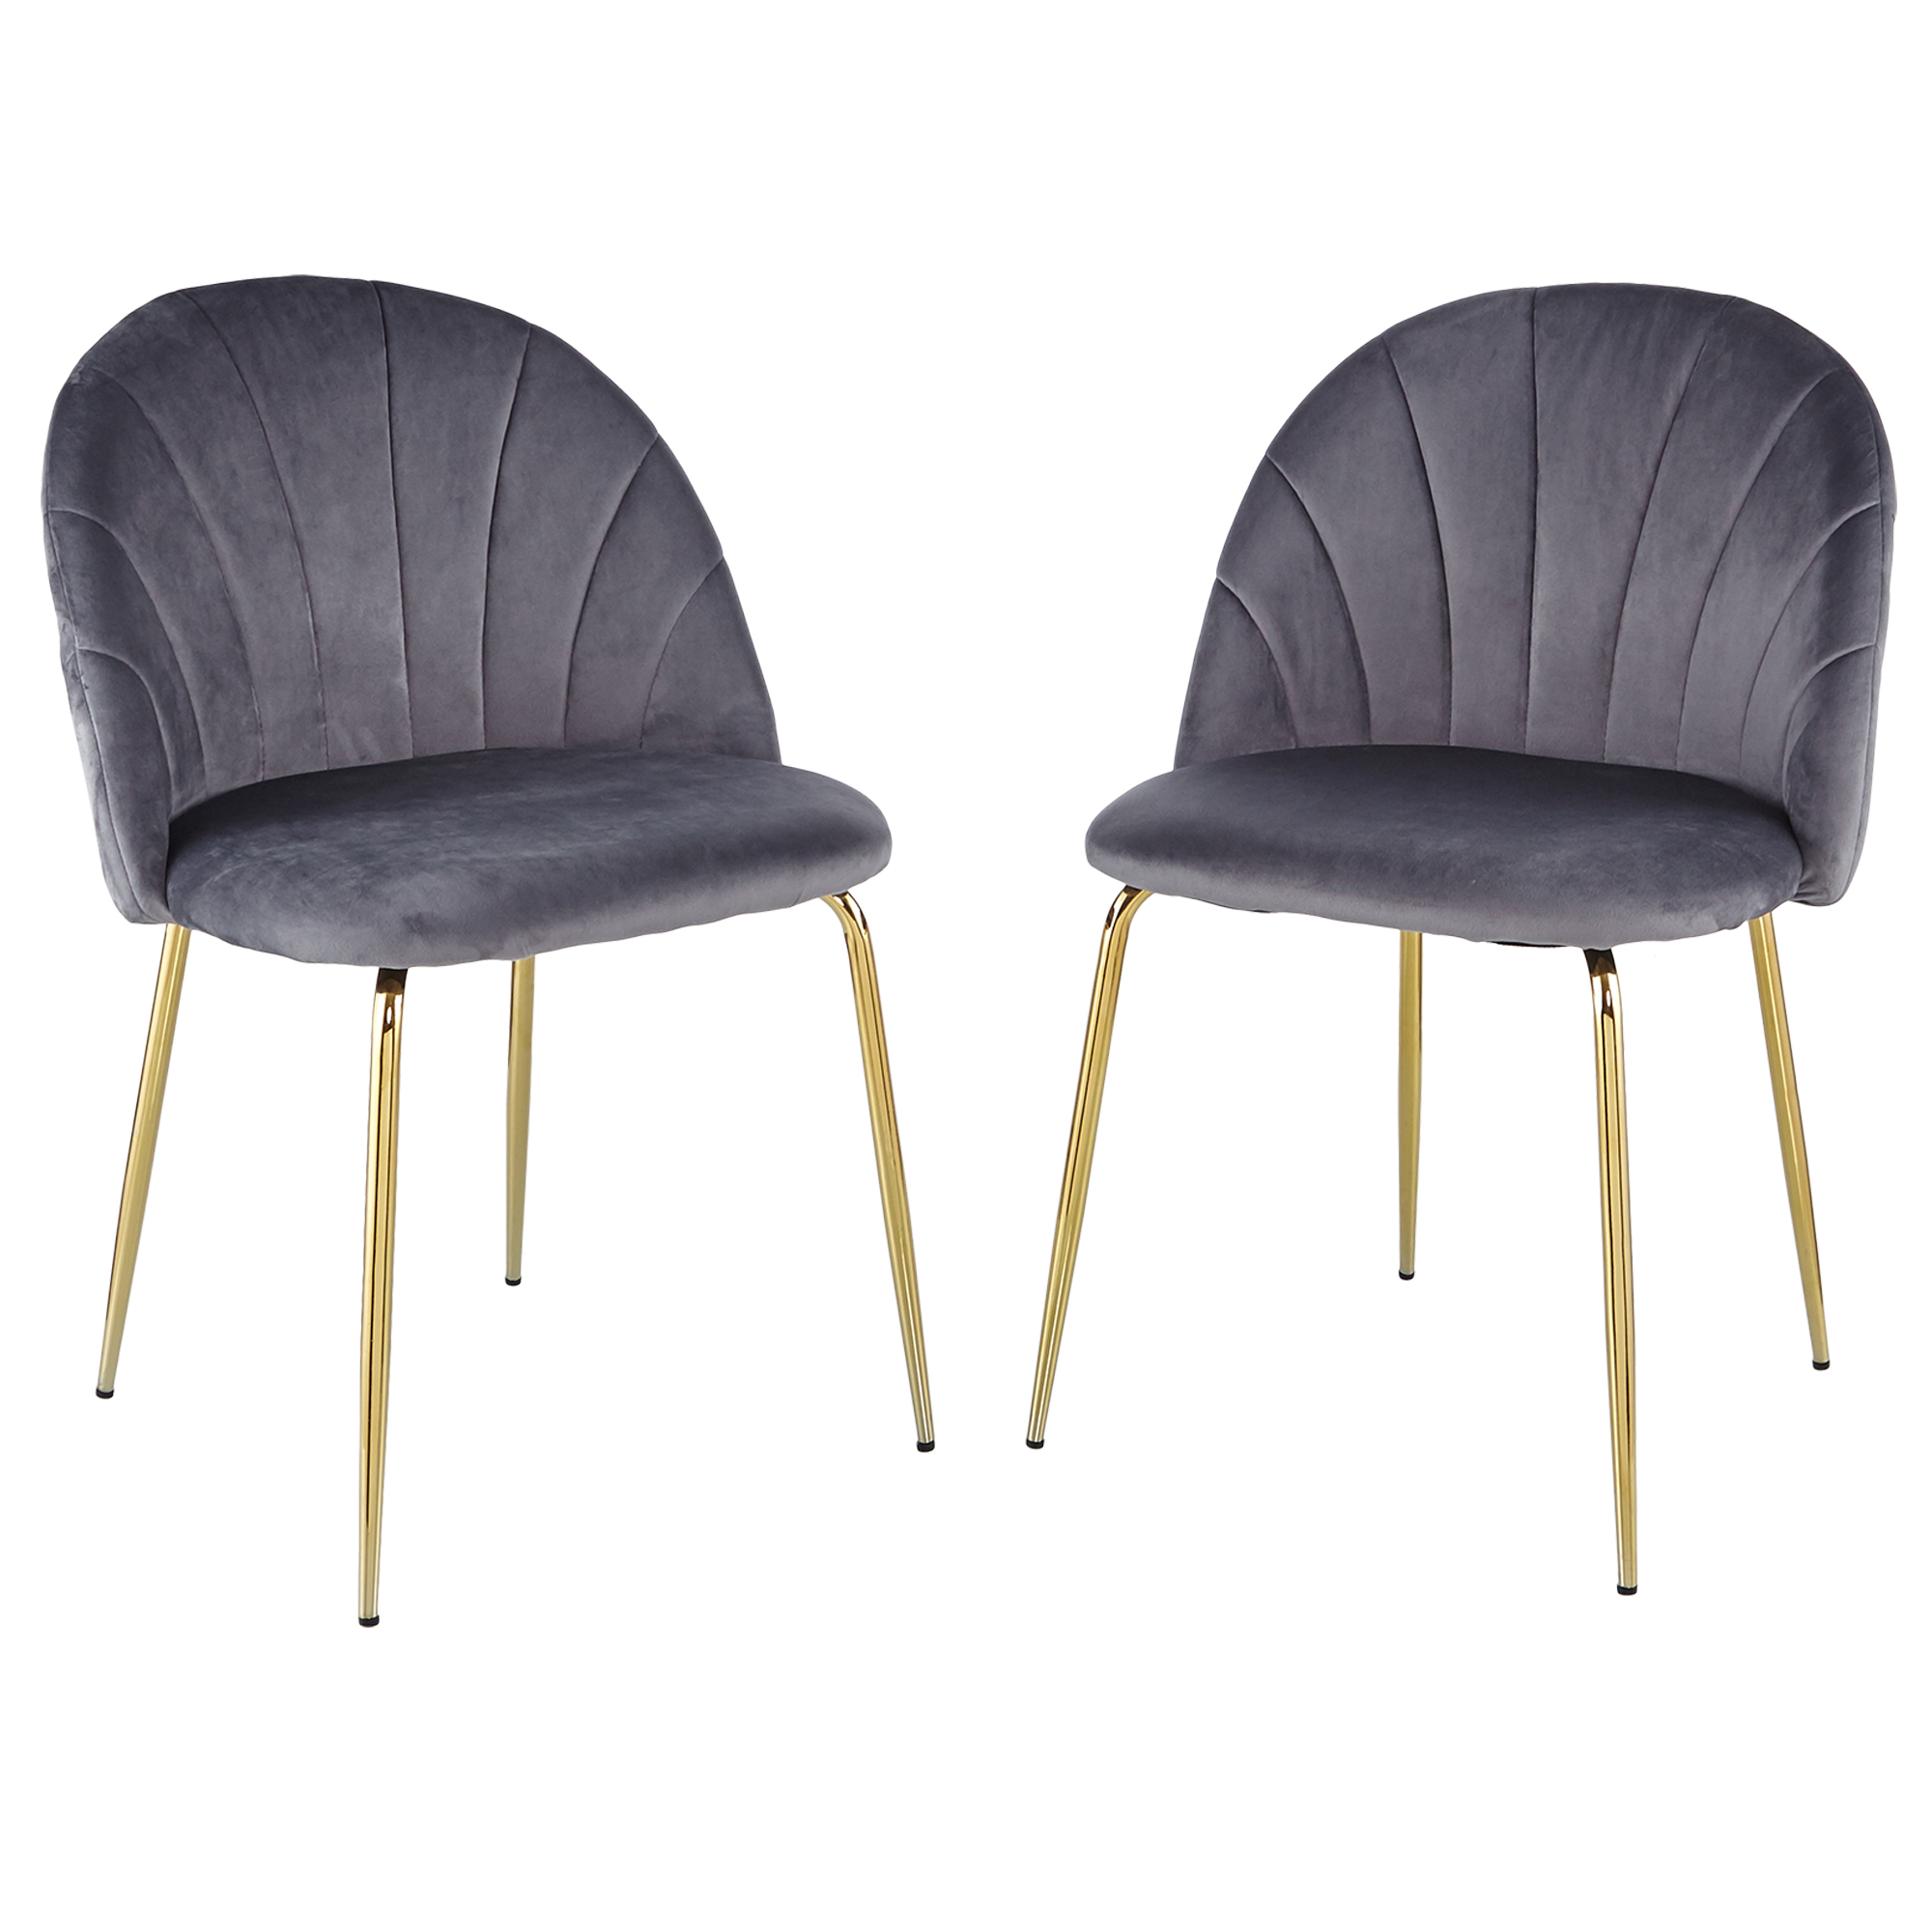 Modern  Grey  dining chair(set of 2 ) with iron tube golden legs, velvet cushions and comfortable backrest,(N.W 10.582 Ibs / 1piece ) suitable for dining room, living room, cafe, simple structure.-Boyel Living